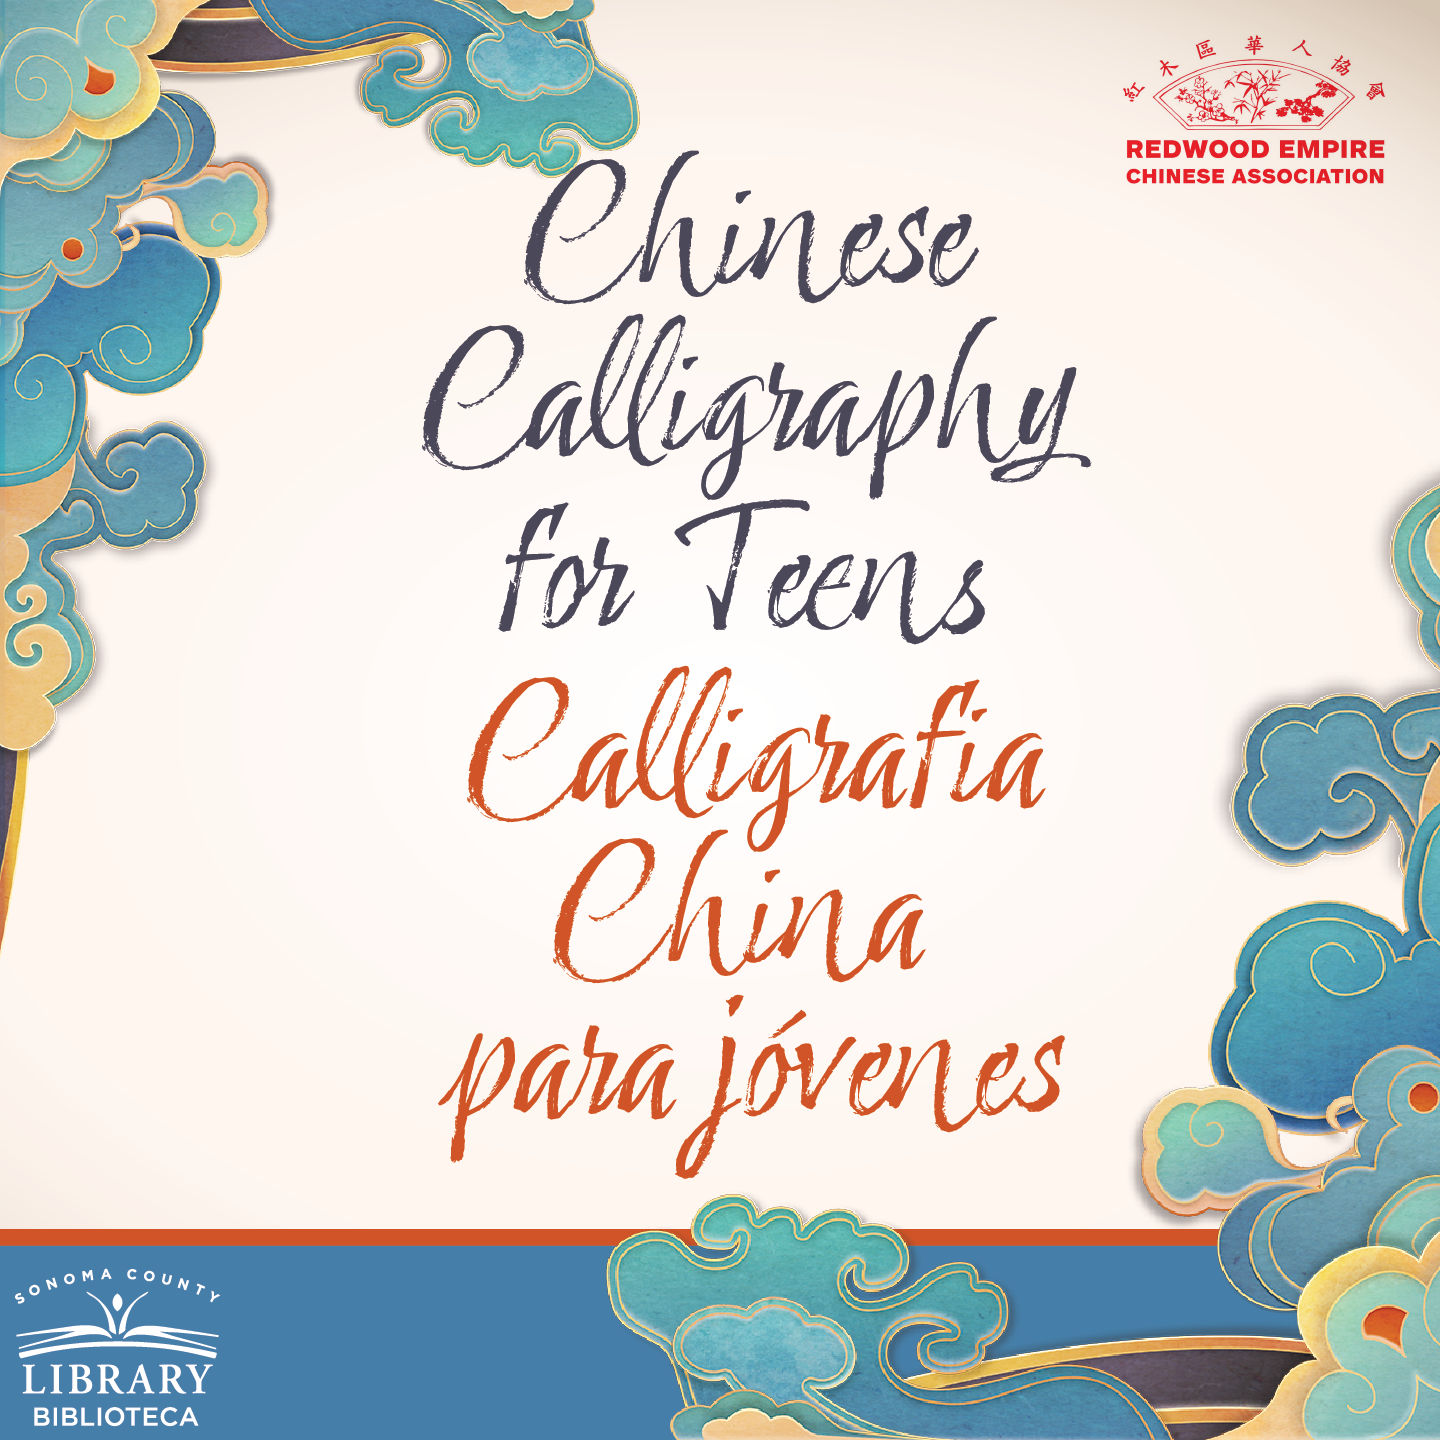 Intro to Chinese Calligraphy for Teens